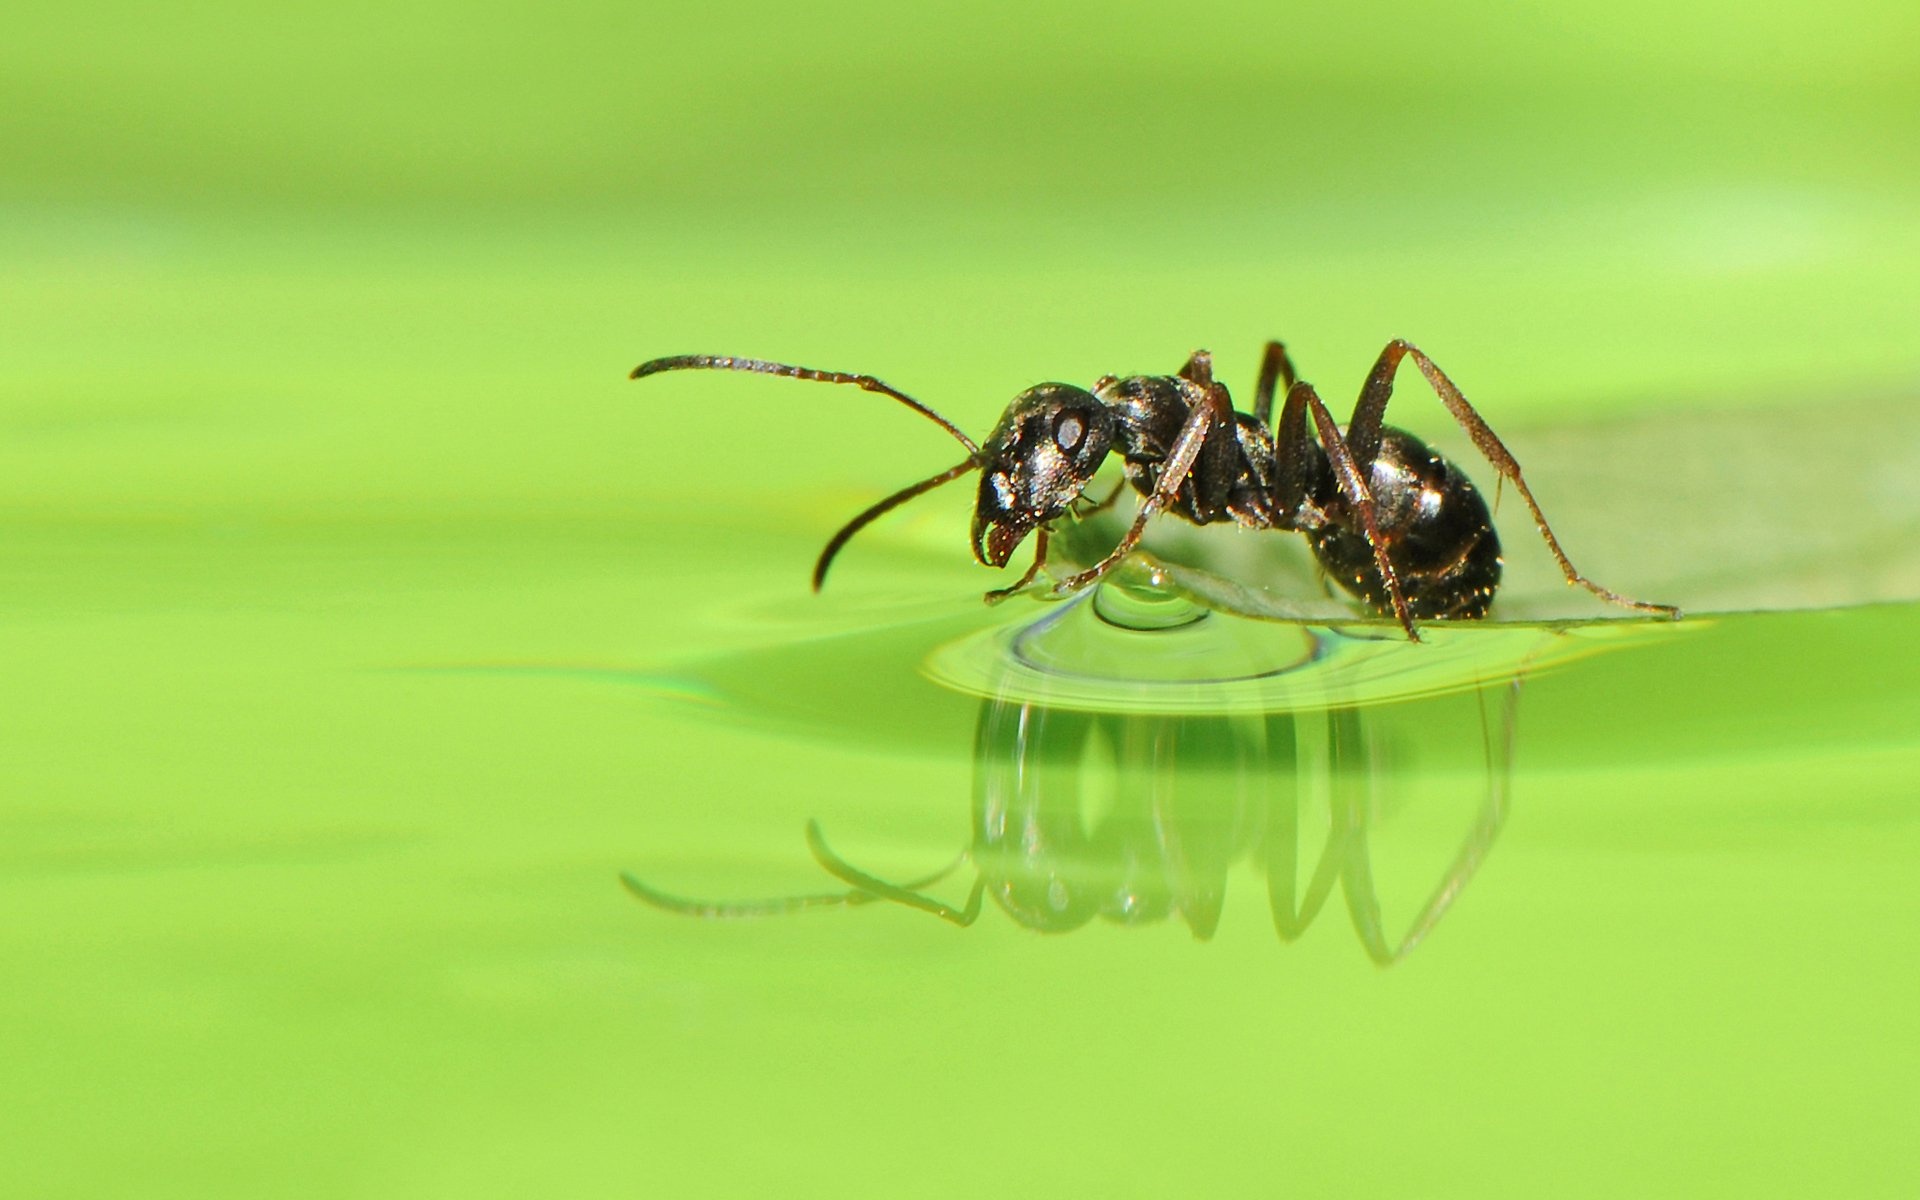 Ant wallpaper, Dynamic ant image, Eye-catching design, Perfect for screens, 1920x1200 HD Desktop